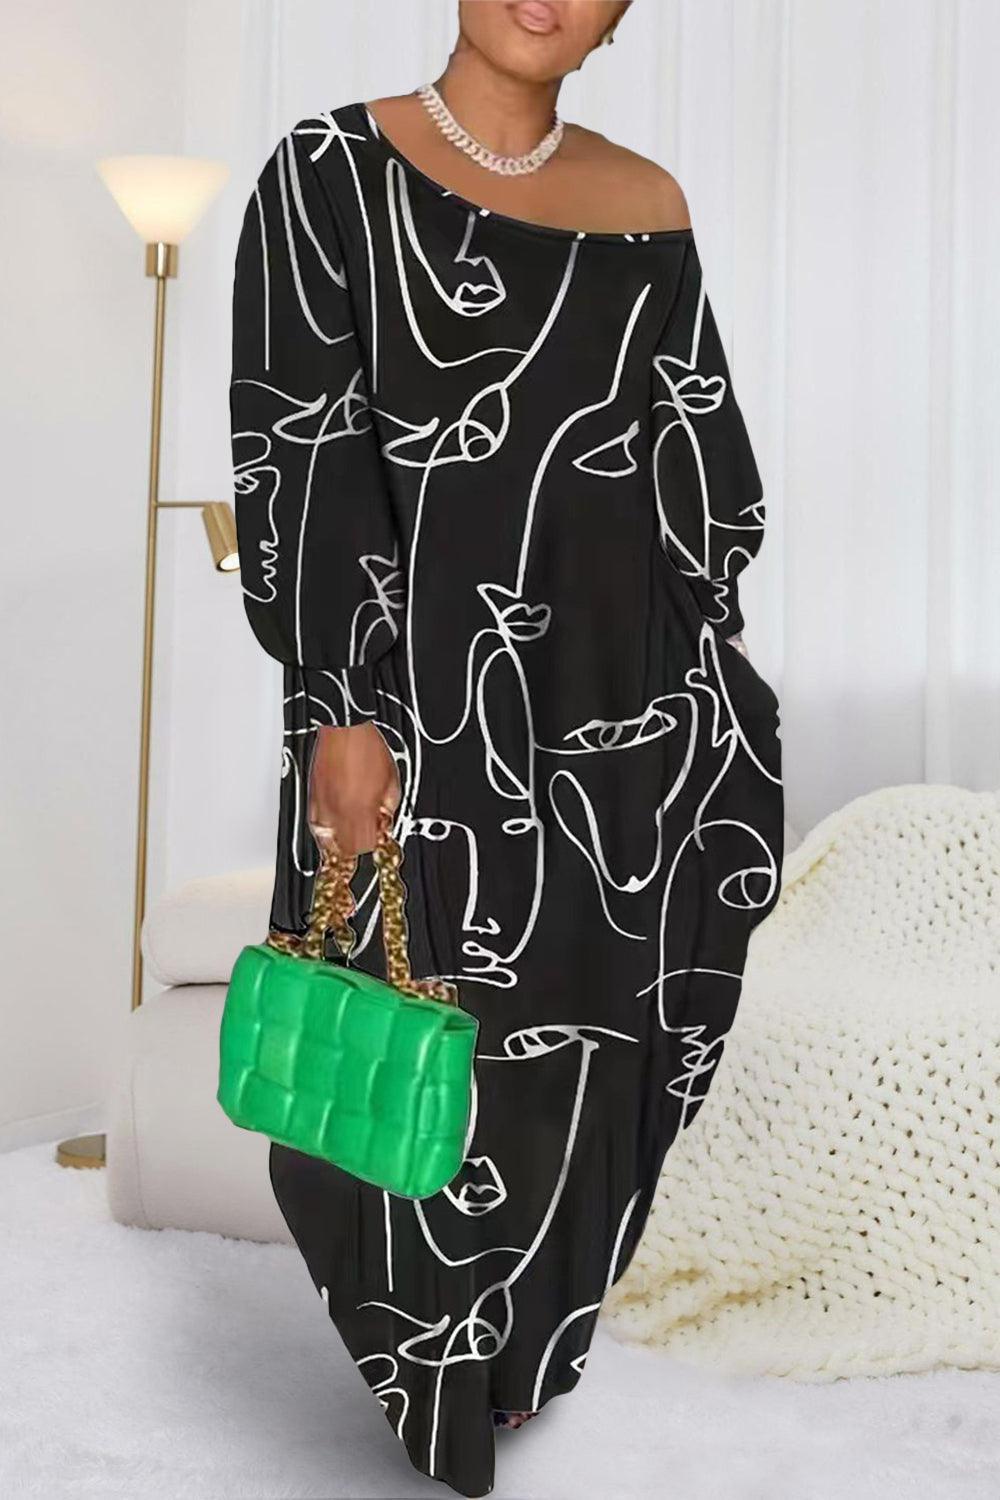 a woman in a black and white dress holding a green purse